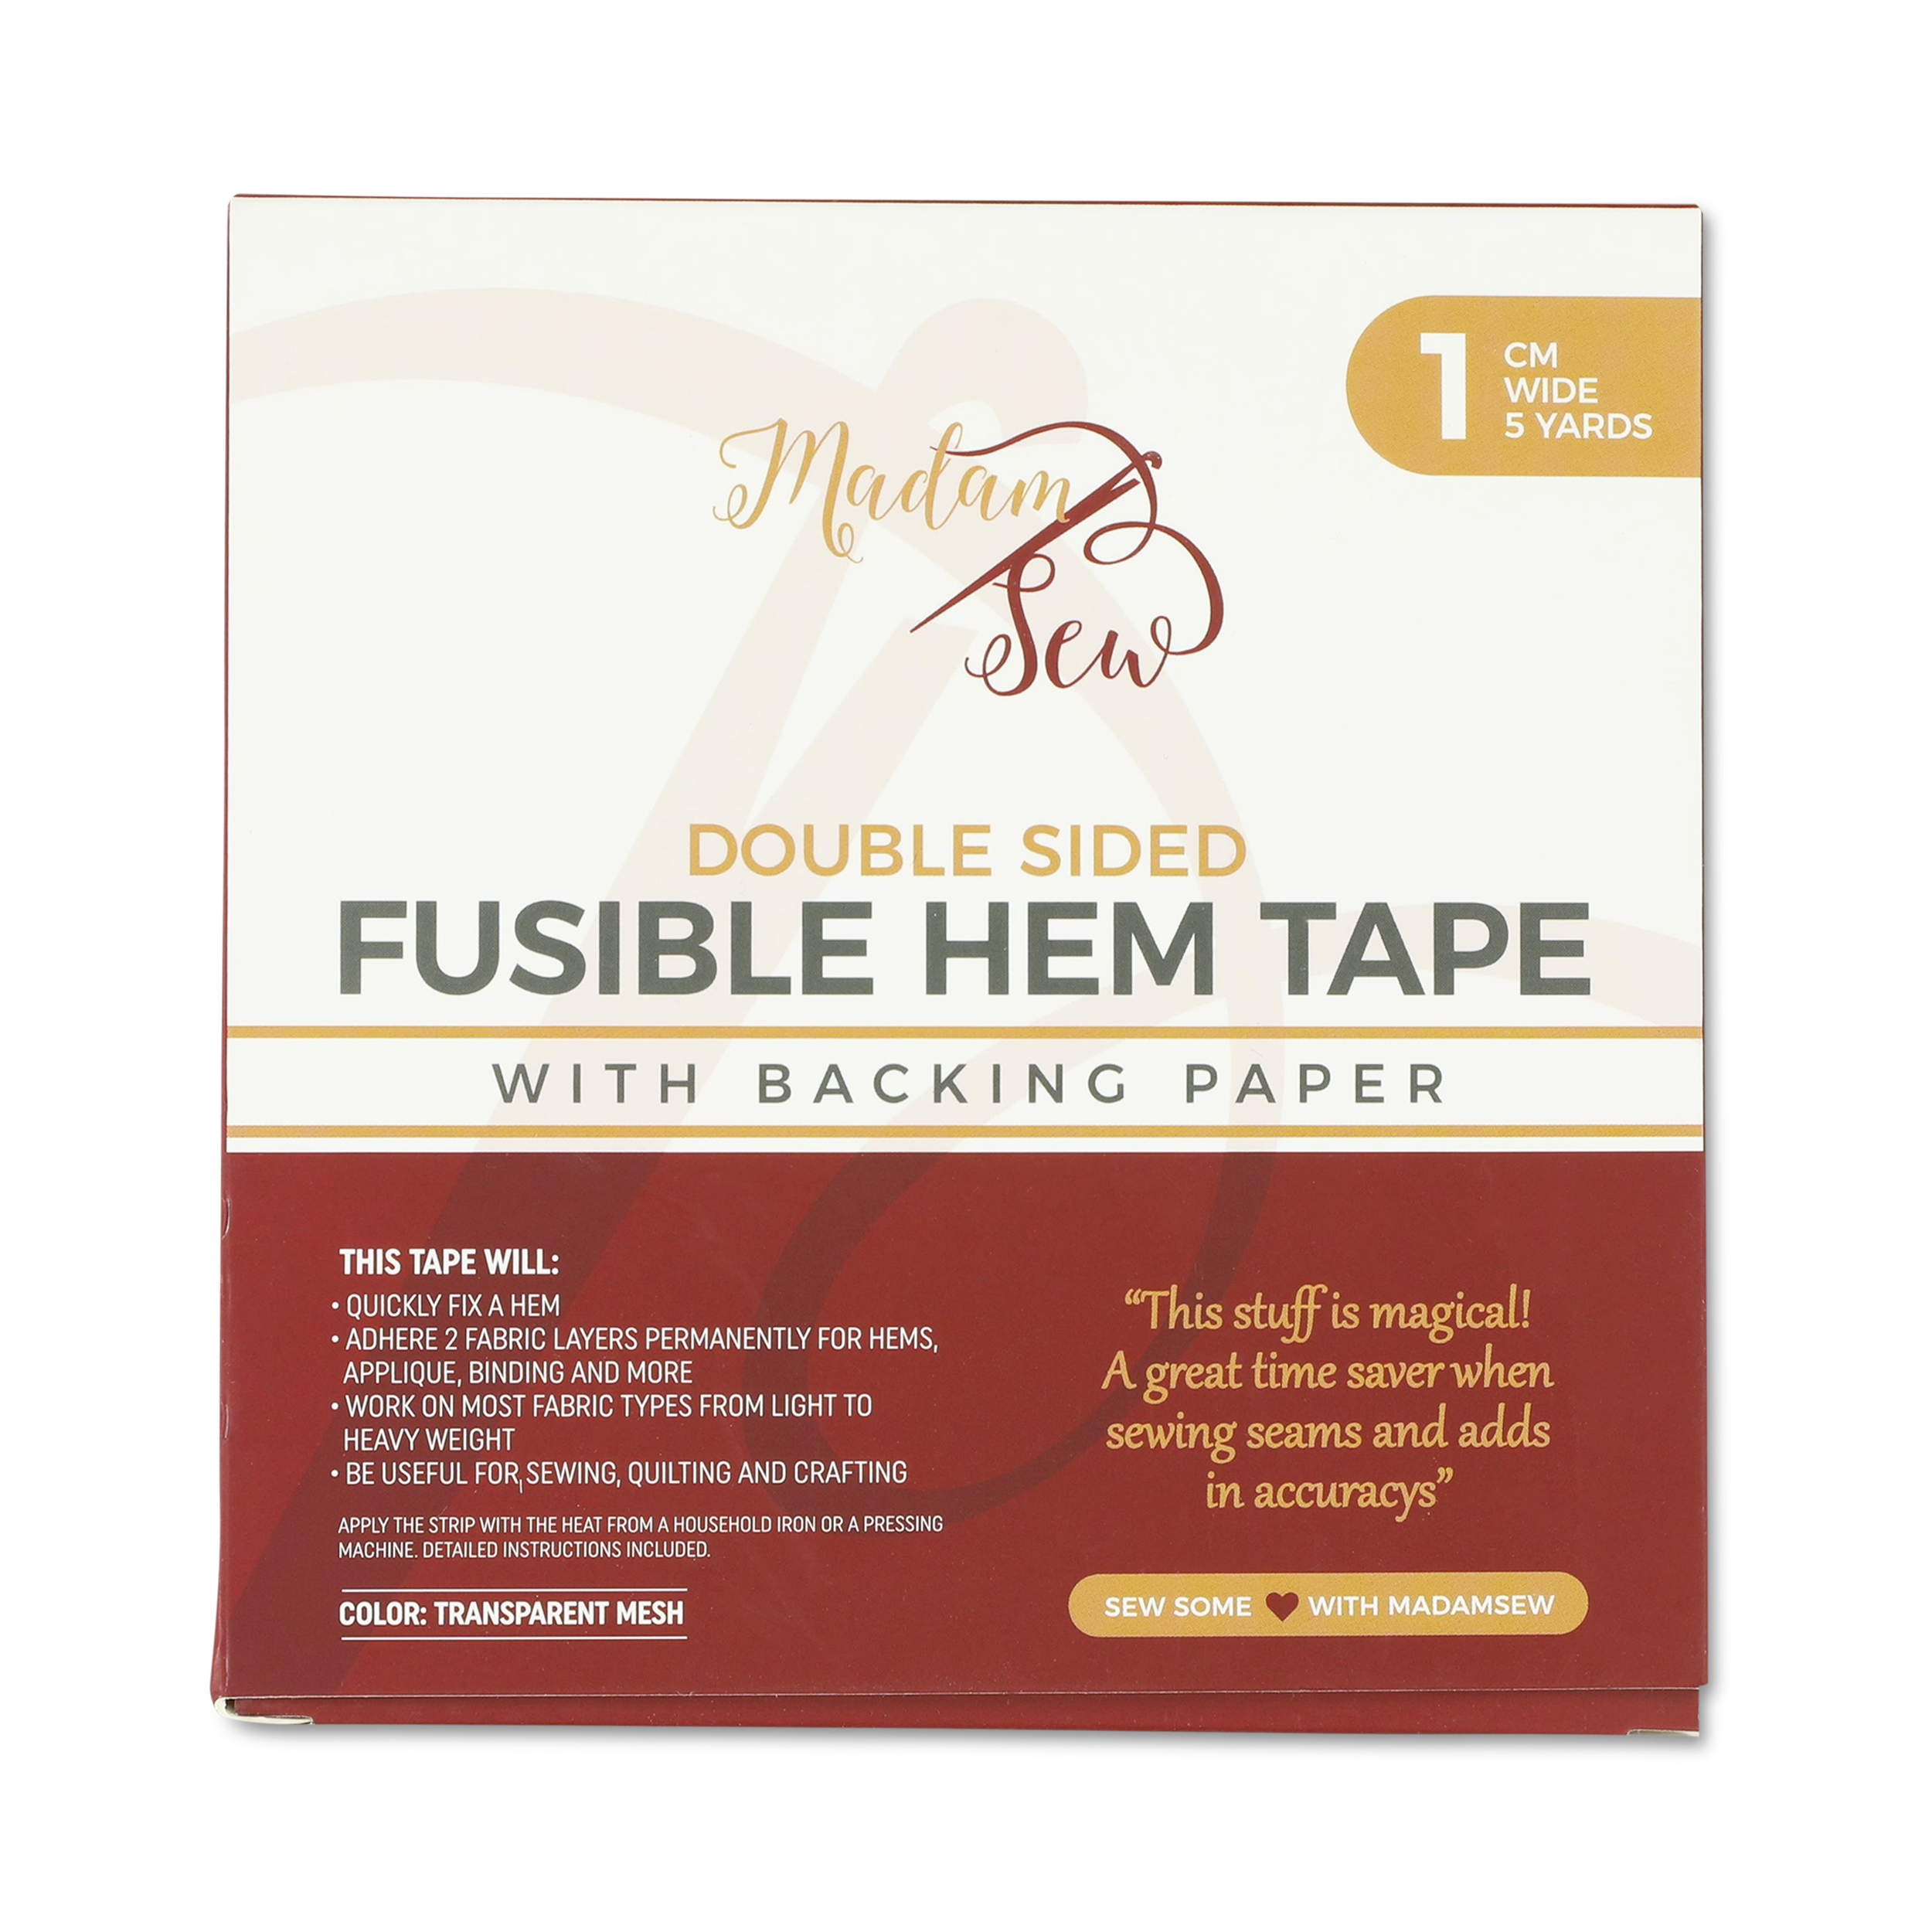 How to Remove Hem Tape From Fabric